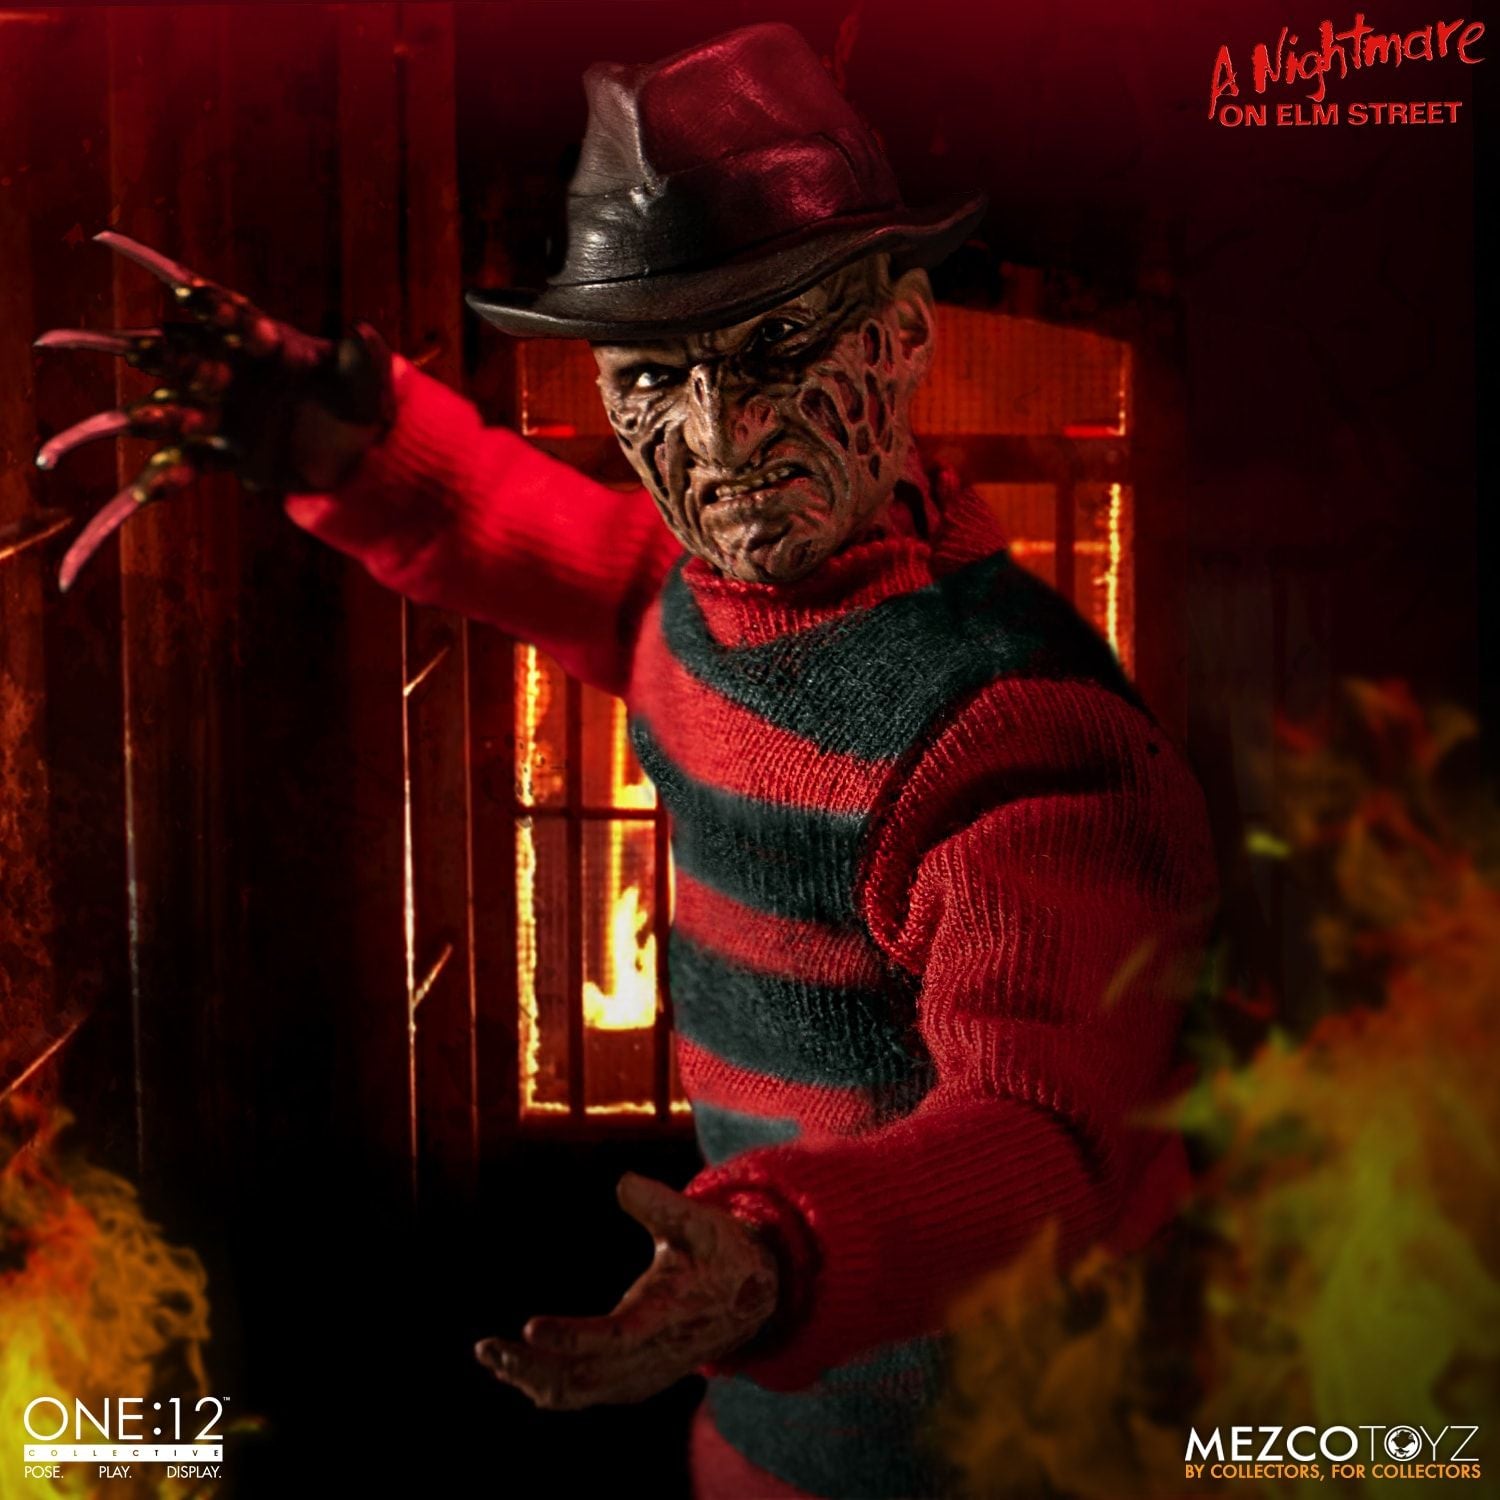 Mezco Toys One:12 Collective: A Nightmare on Elm Street: Freddy Krueger Action Figure 7